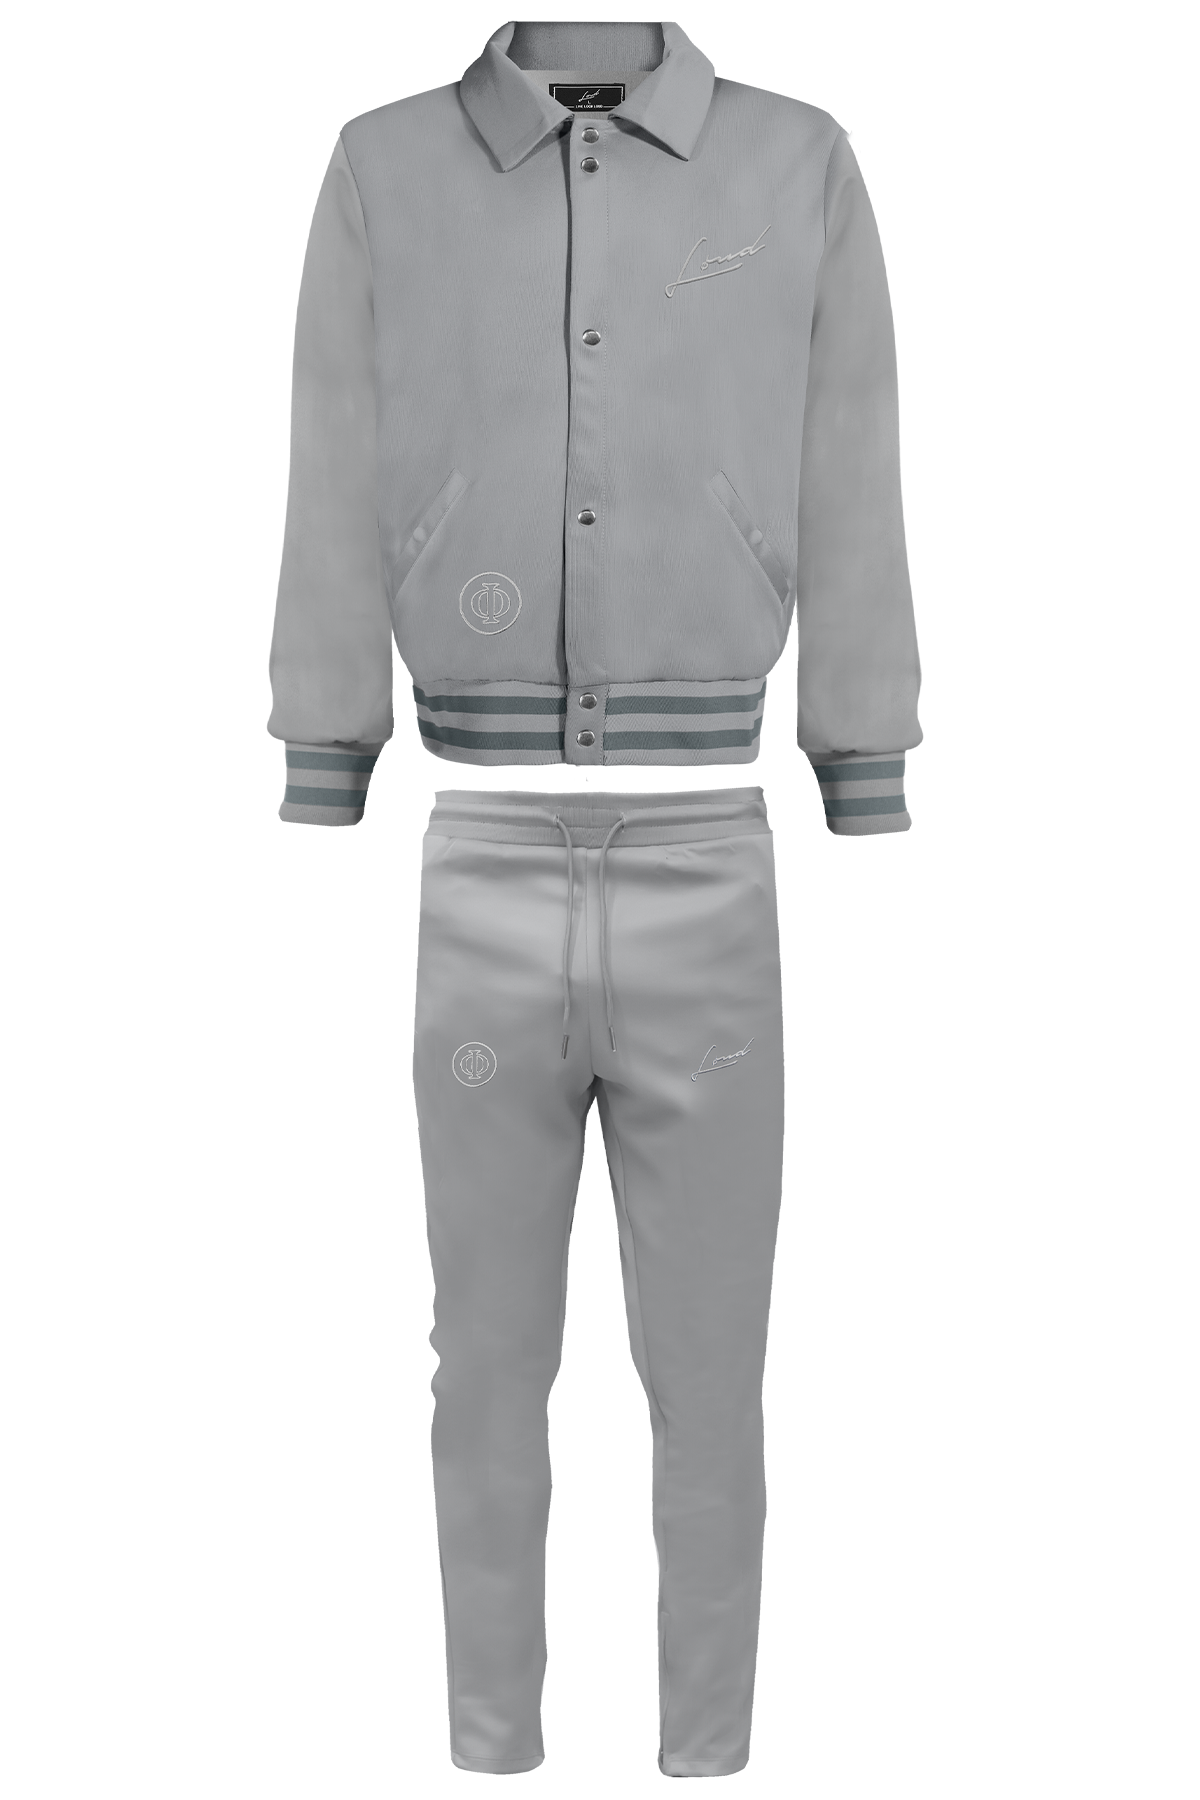 Loud Grey Embroidered Tracksuit - Live Look Loud